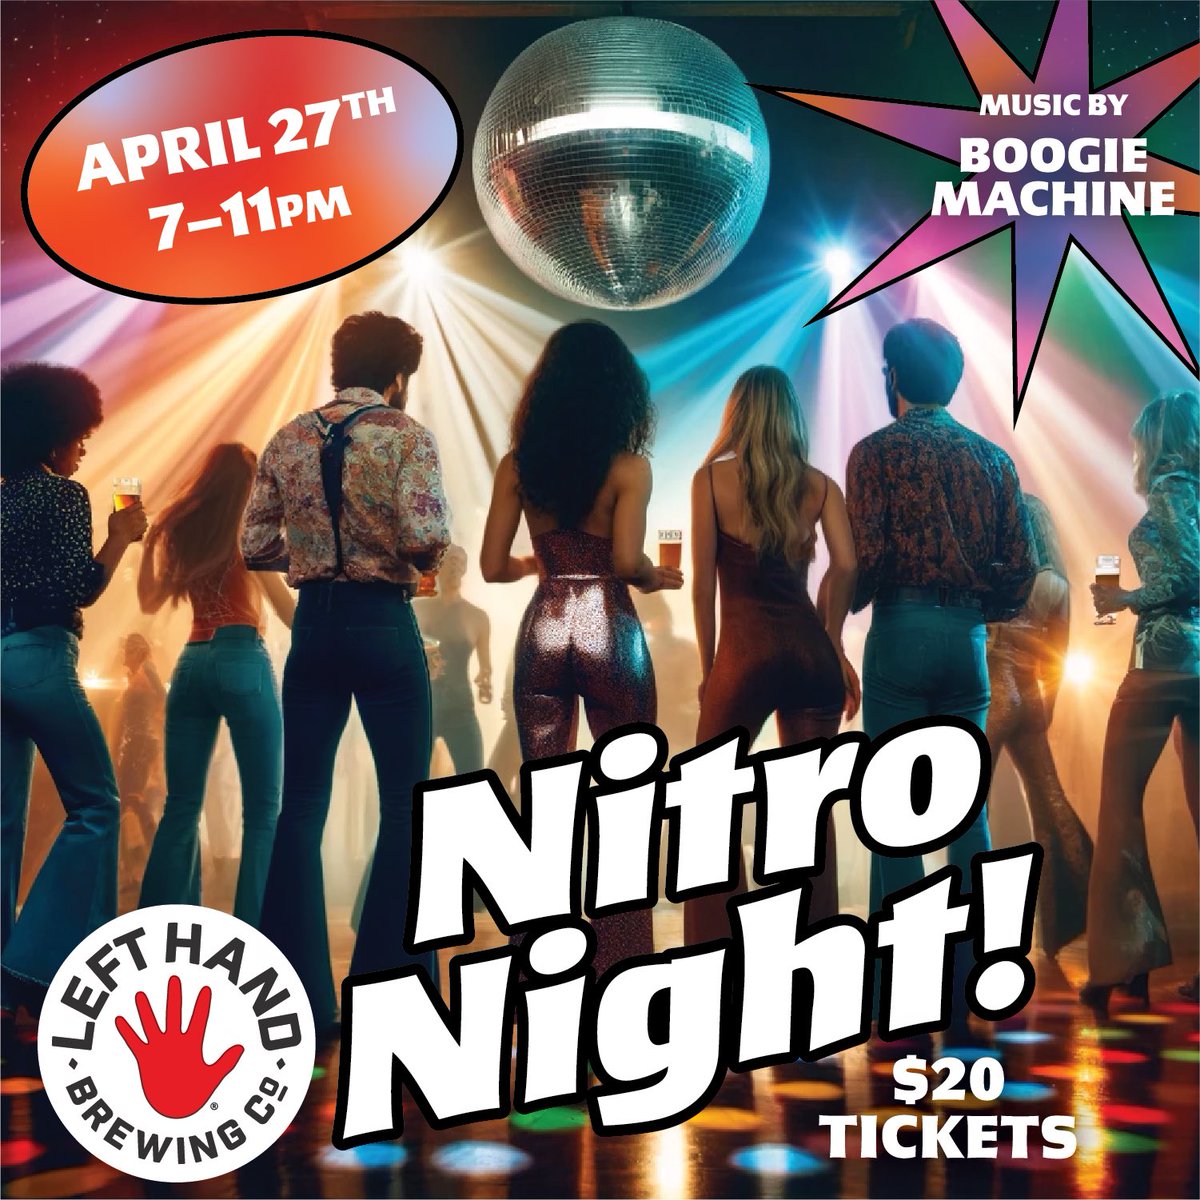 Dust off those bell-bottoms & glitter up! It’s disco-themed Nitro Night in the Tasting Room 🪩 Groove to disco beats from Boogie Machine & sip on smooth Nitro brews from your fav CO breweries. More details & tickets 👉 tinyurl.com/ymj9wywh